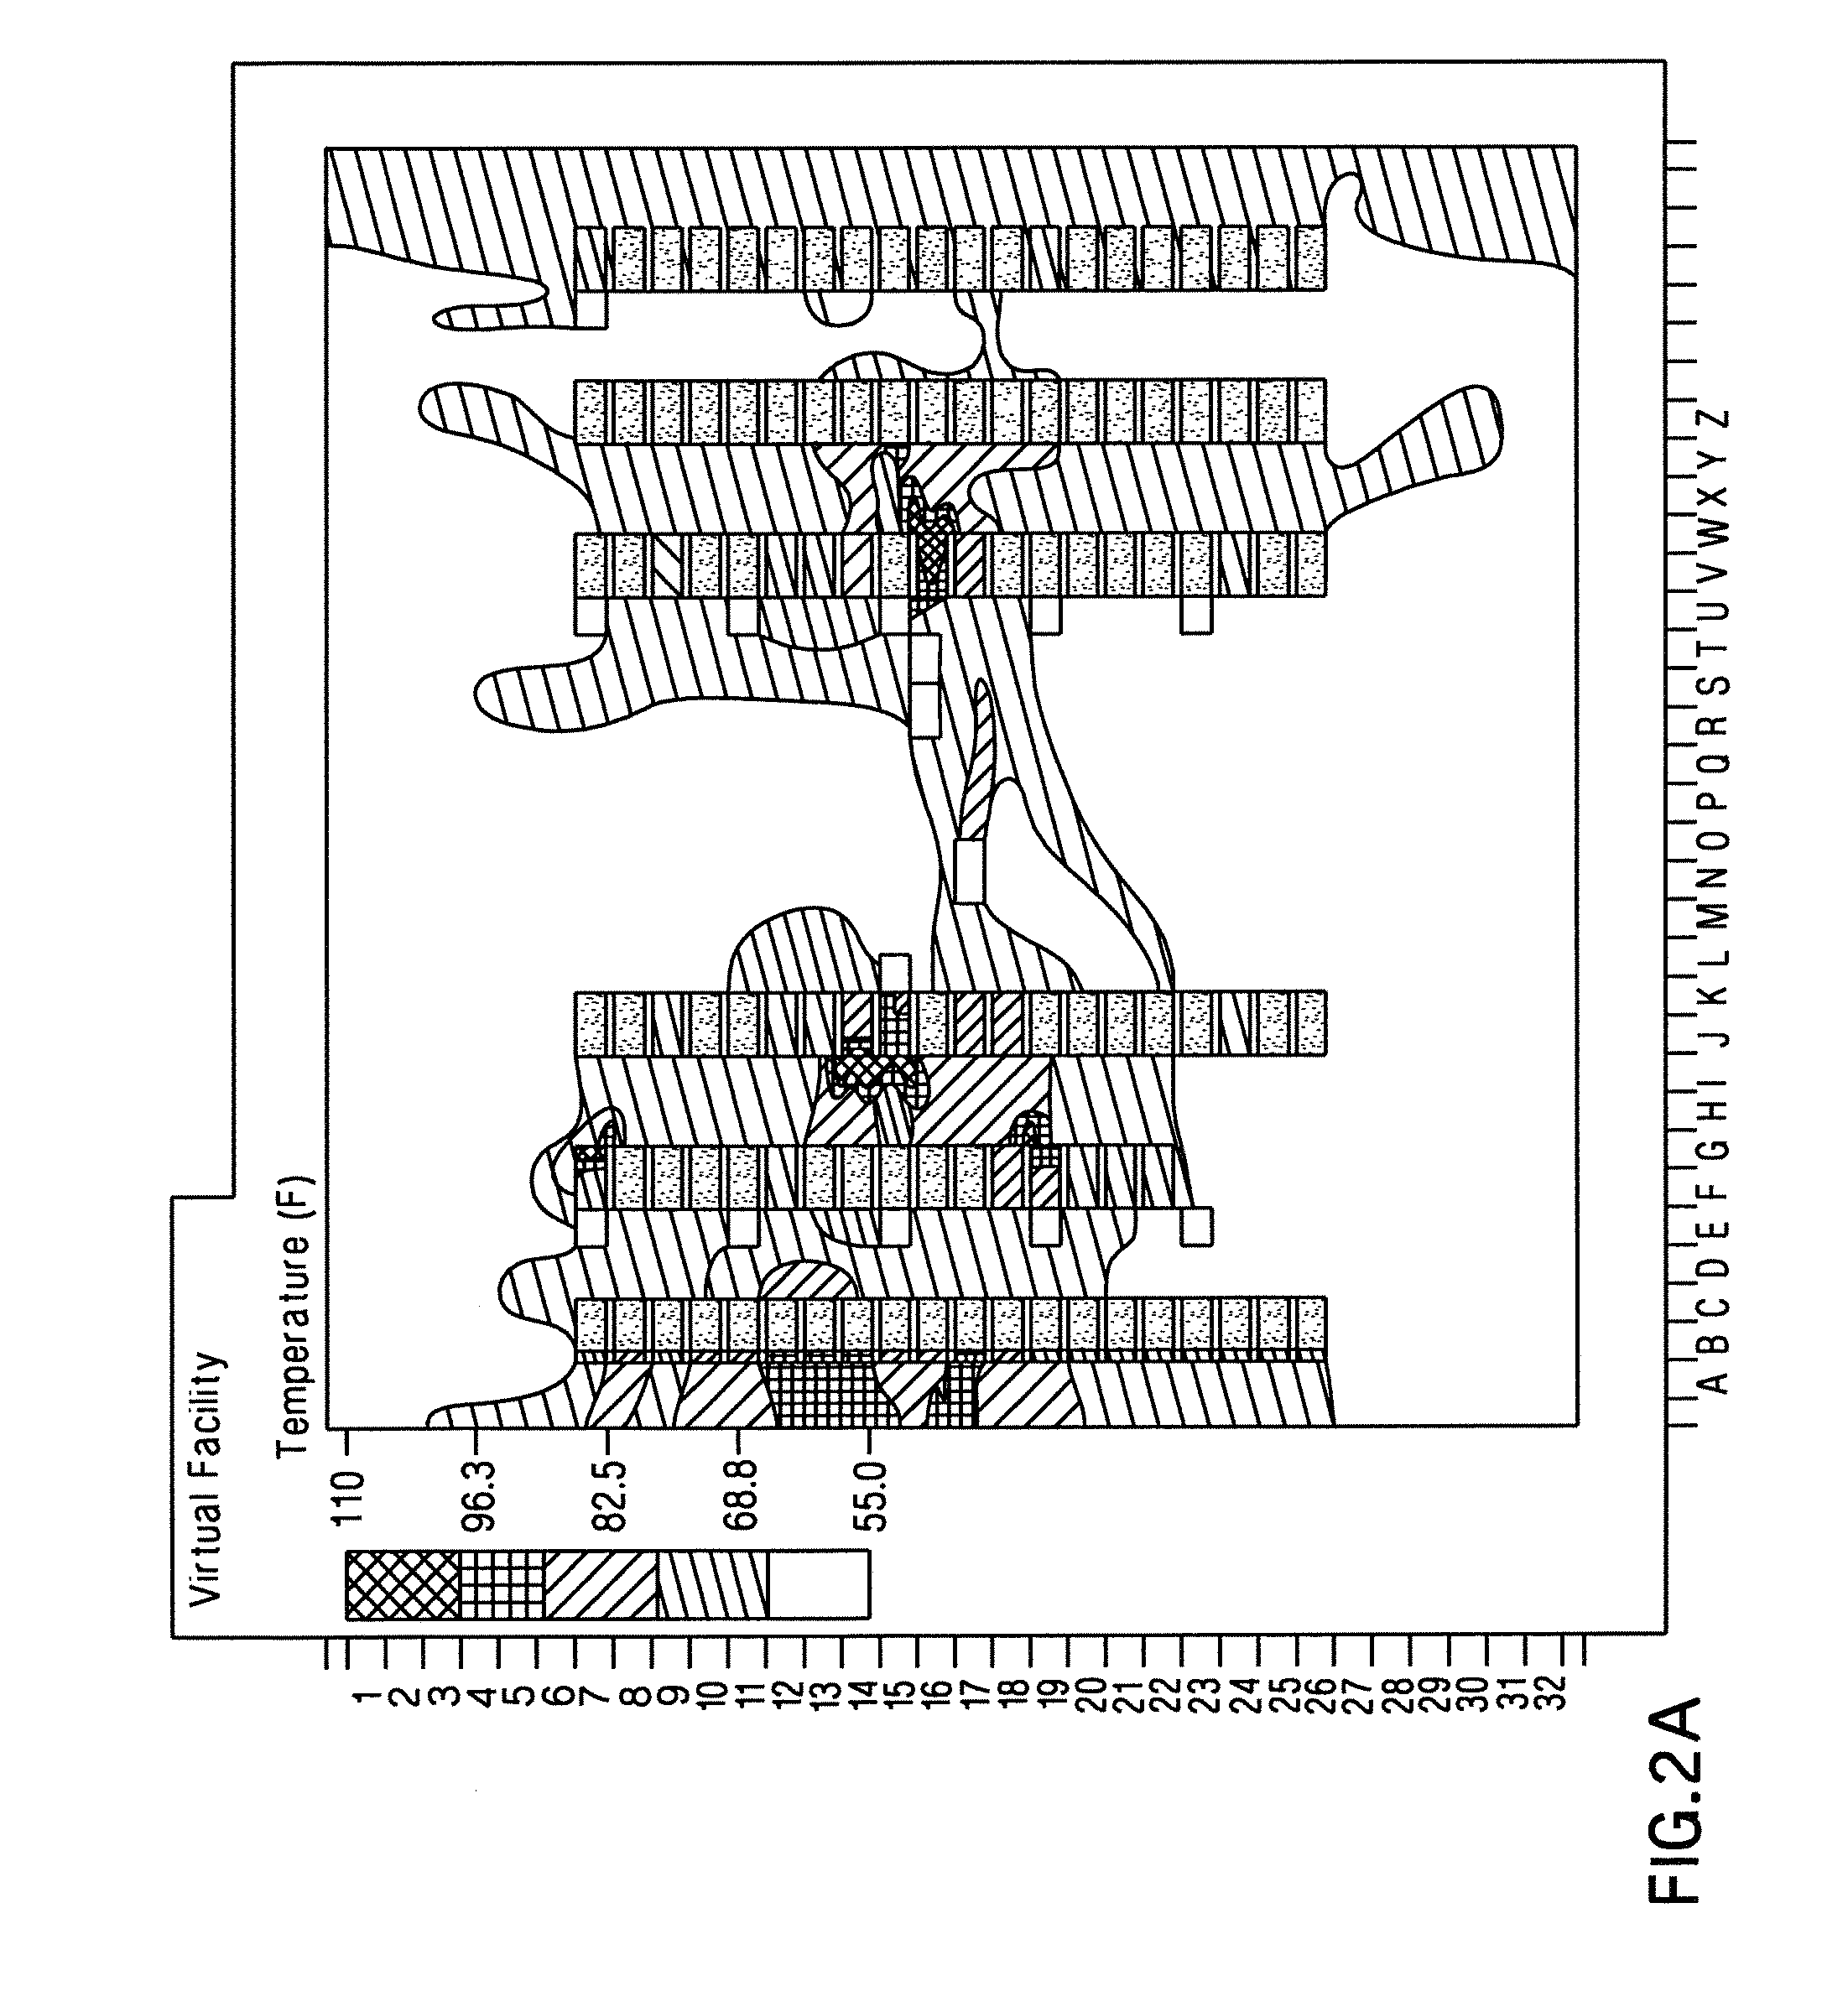 Computational Fluid Dynamics Systems and Methods of Use Thereof